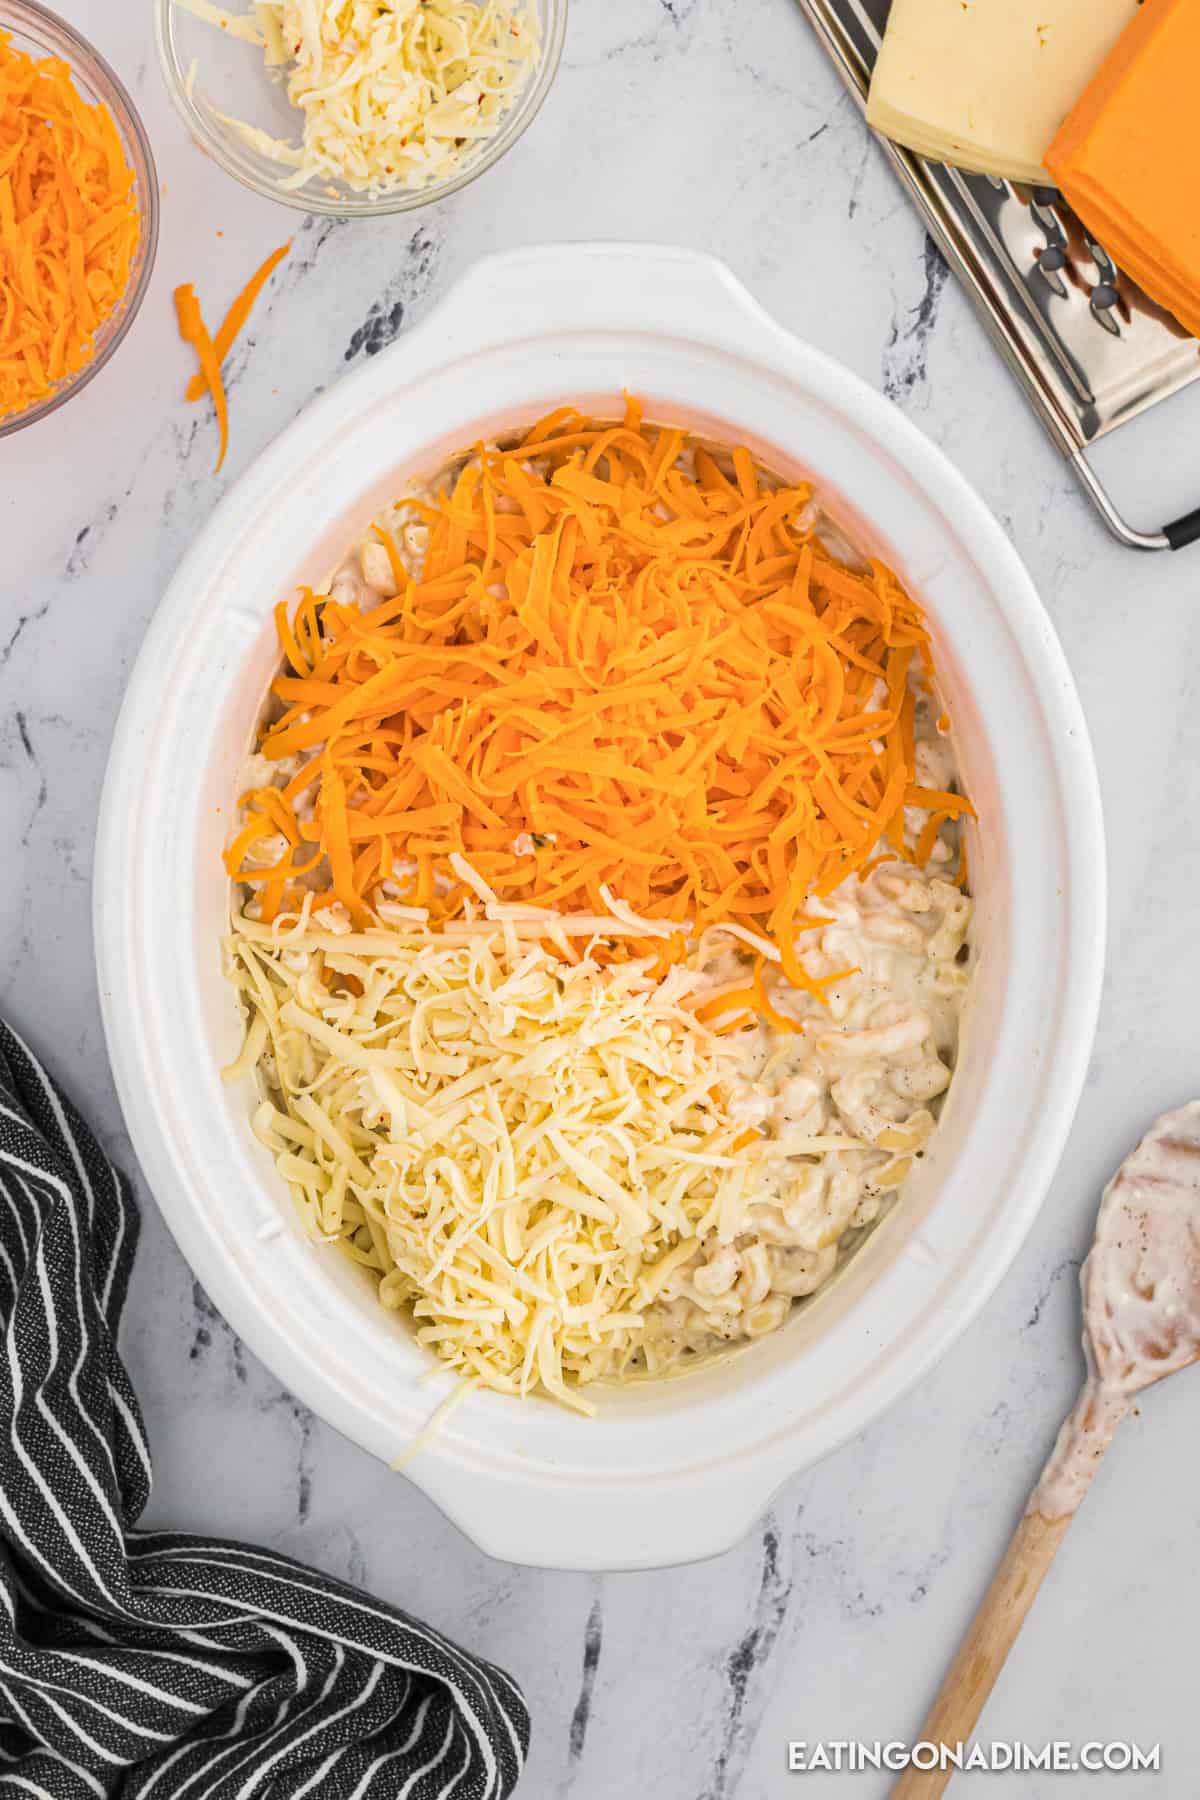 Top with shredded cheese 